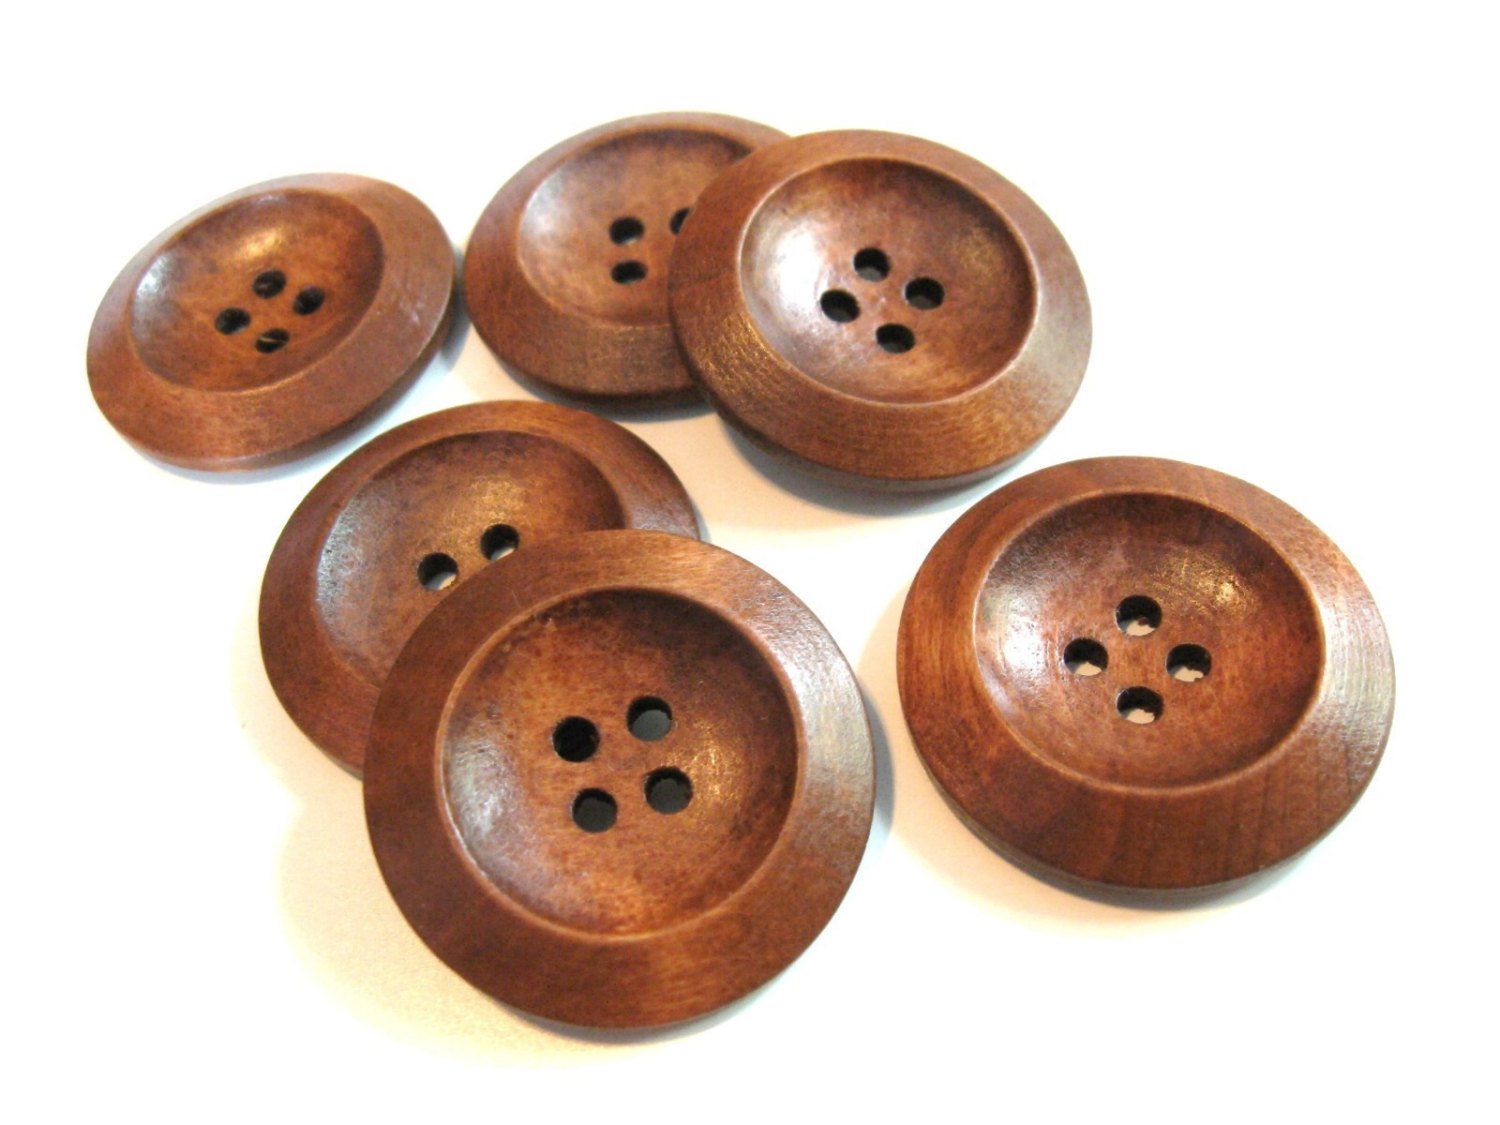 Red brown Wooden Sewing Buttons 30mm - set of 6 natural wood button